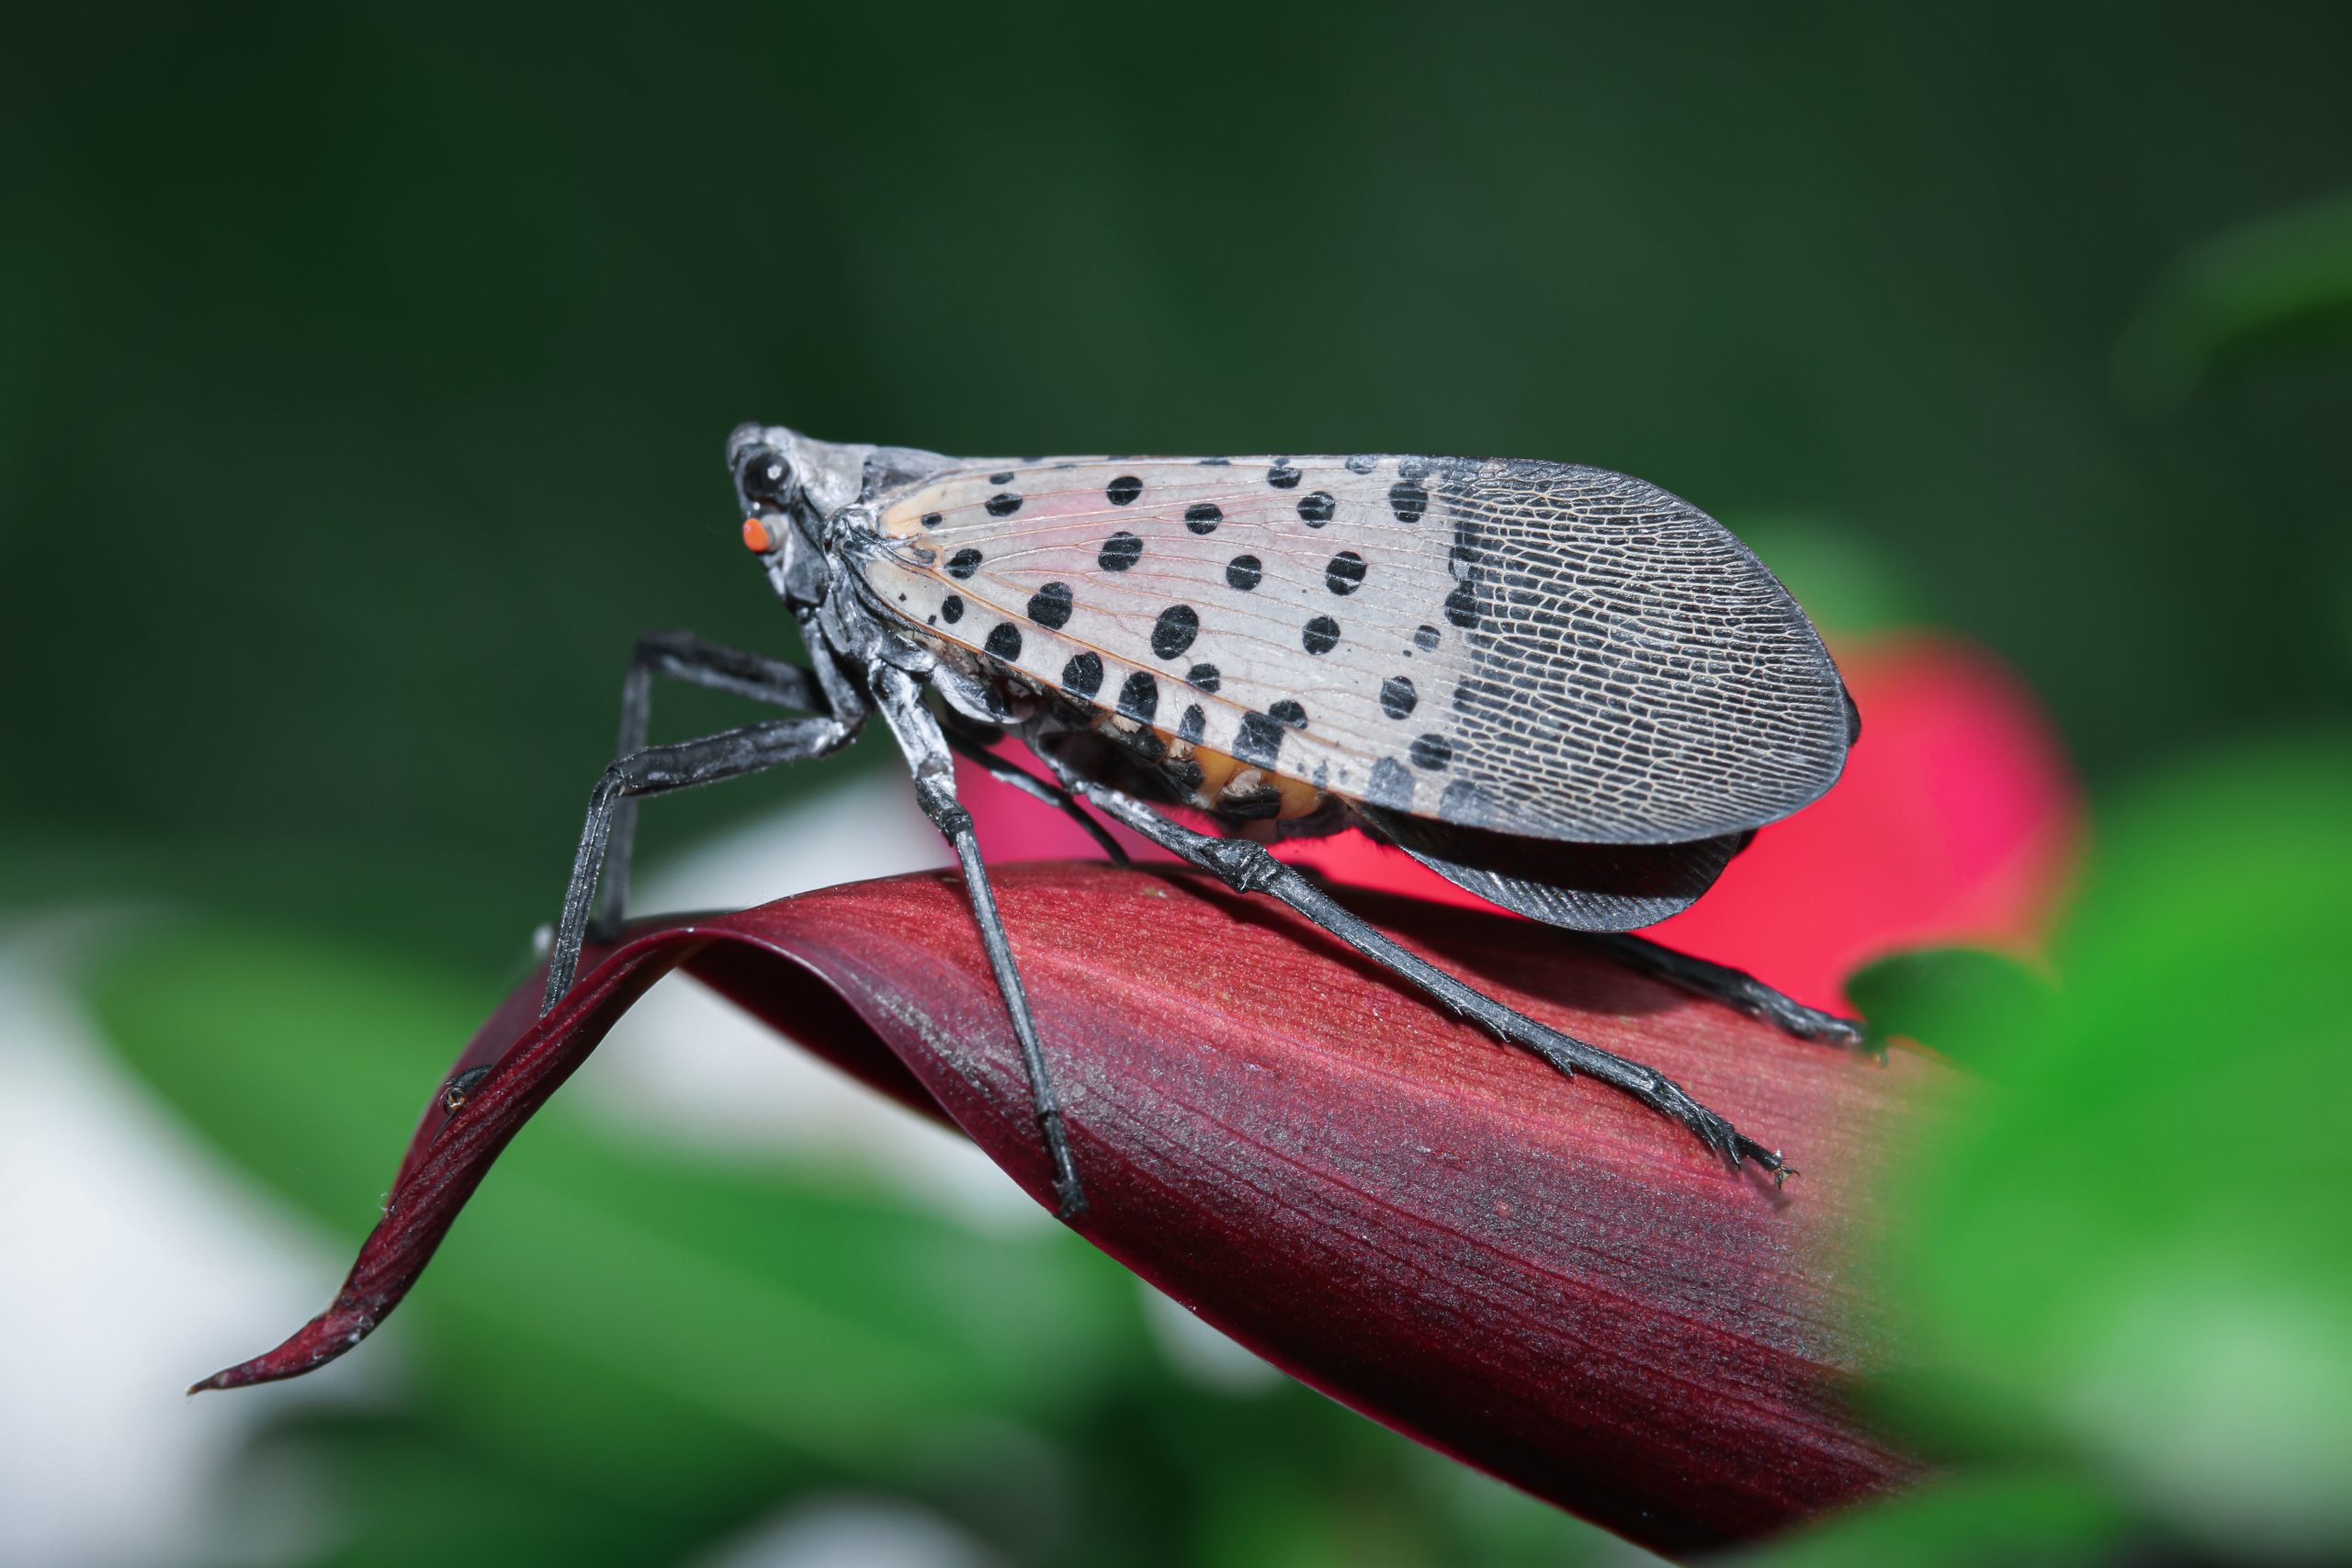 The spotted lanternfly is an invasive species in the United States native to parts of China and Vietnam. It is often identified by its gray wings with red undertones.